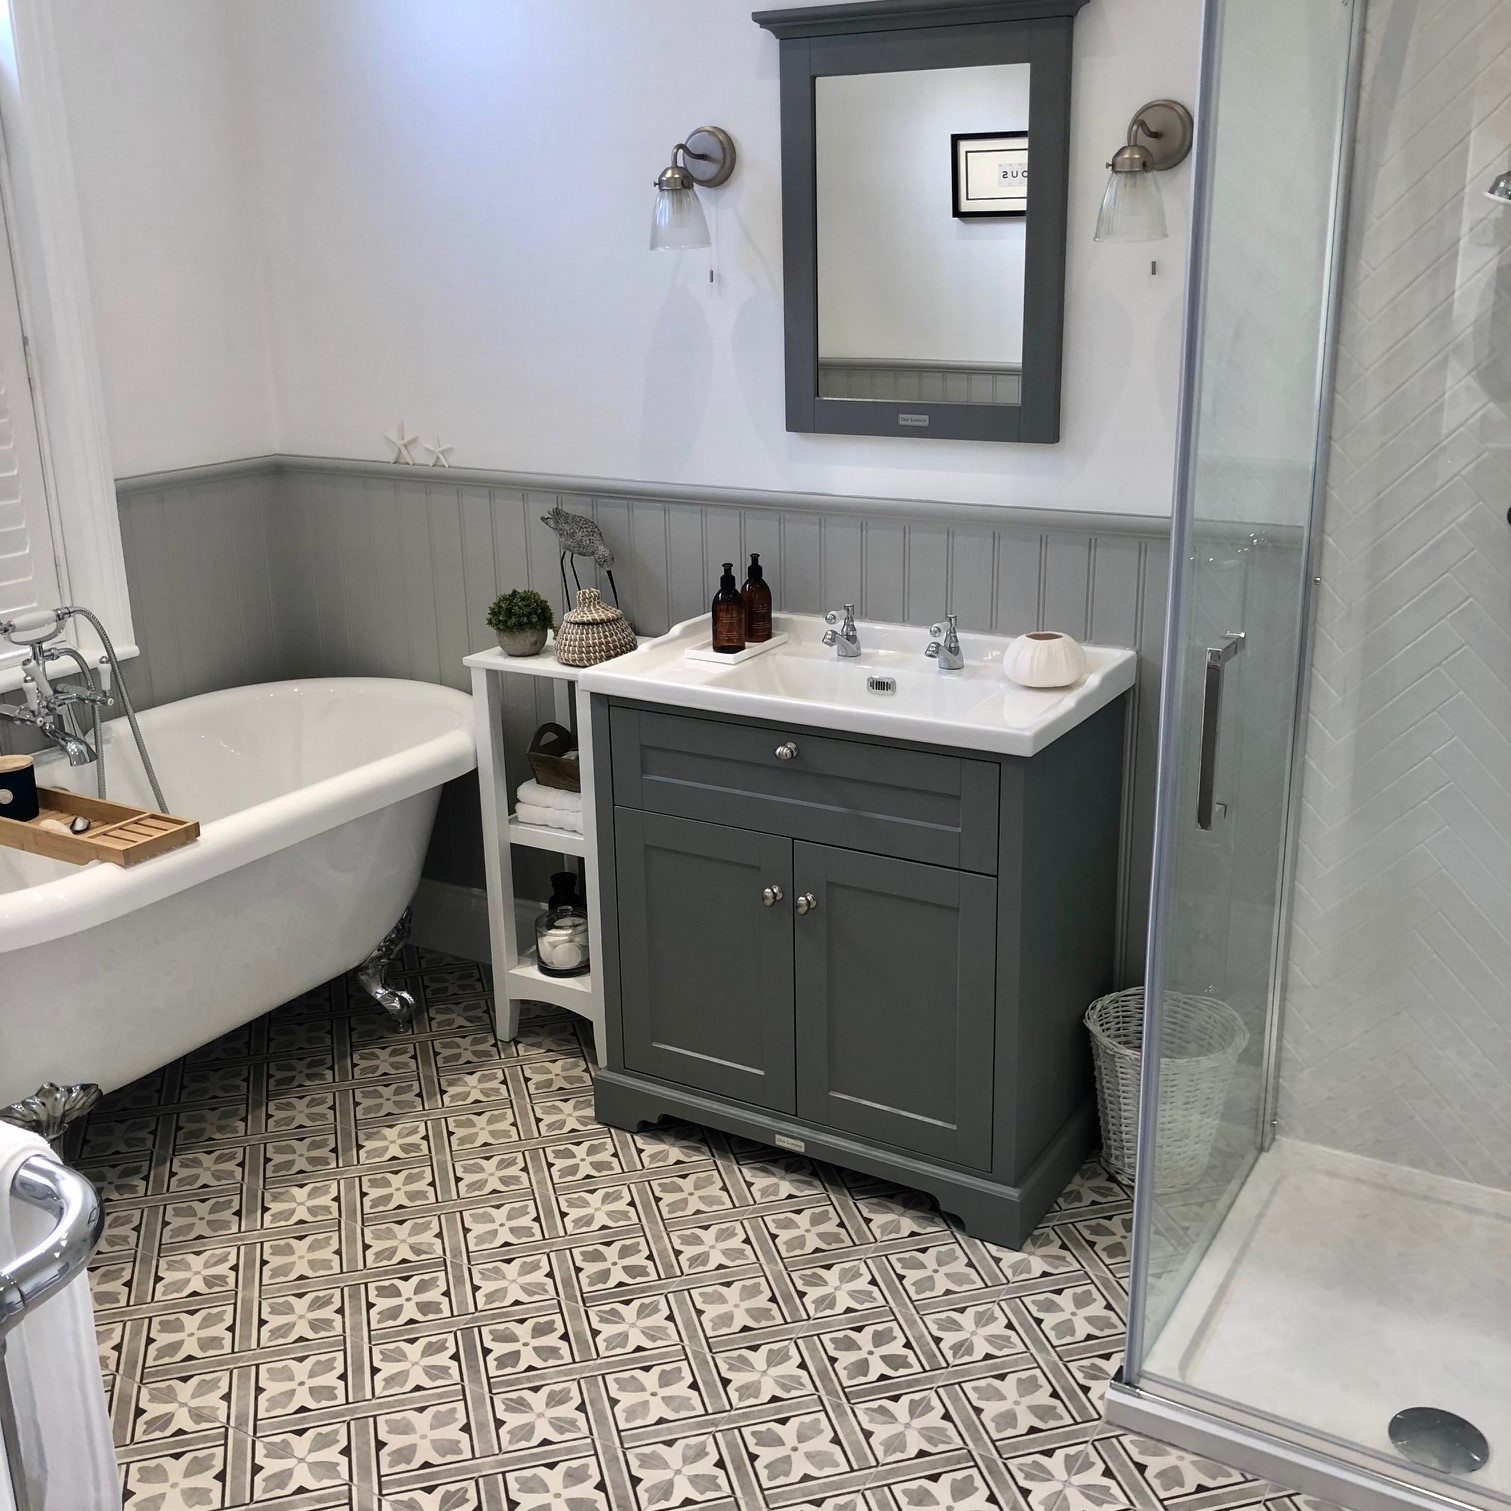 Lucy Used our Mr Jones Charcoal Tiles to Create a Charming Look in her Bathroom